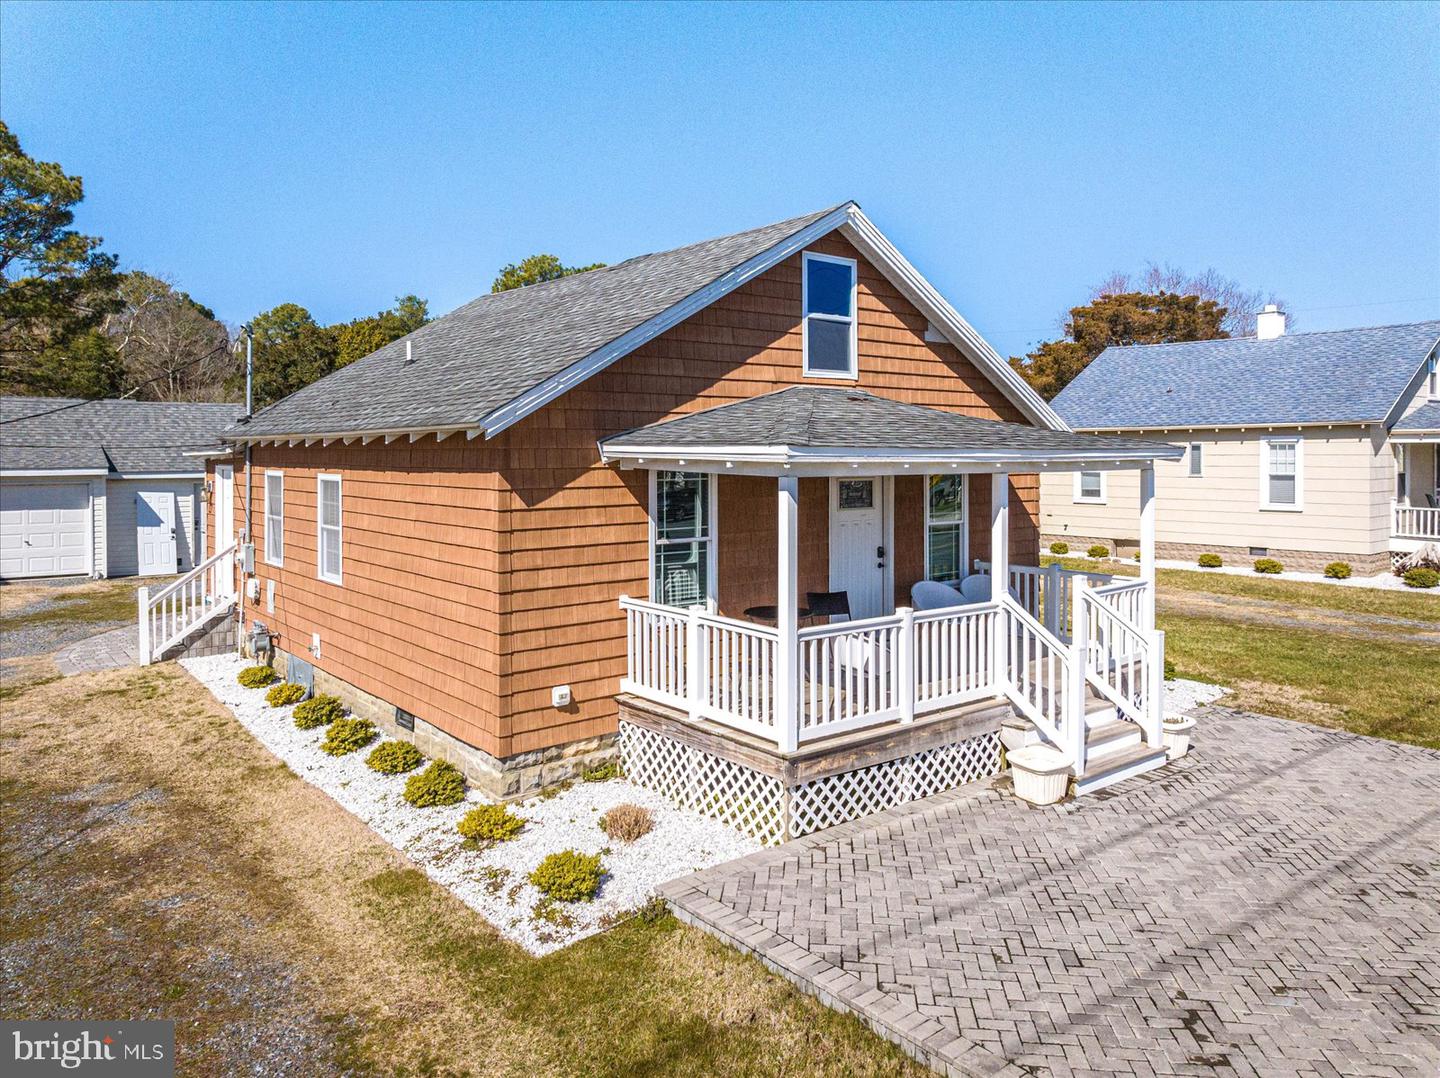 MDWO2019446-802902726142-2024-03-07-00-07-58 9801 / 9805 Golf Course Rd | Ocean City, MD Real Estate For Sale | MLS# Mdwo2019446  - 1st Choice Properties